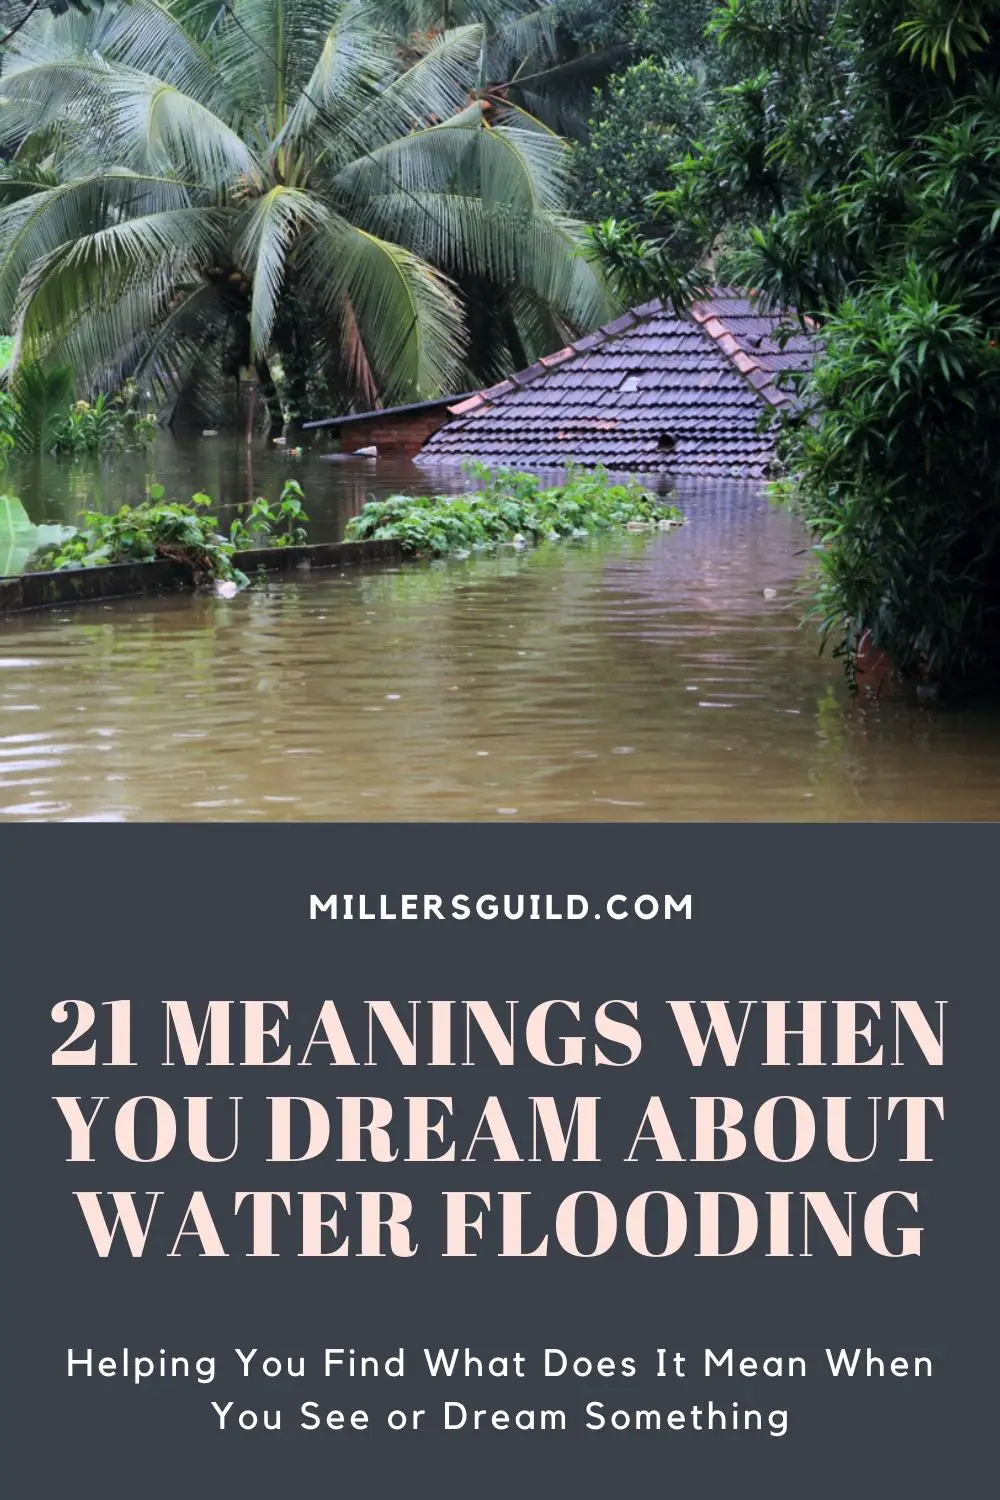 What Is The Spiritual Meaning Of Flood Dreams?